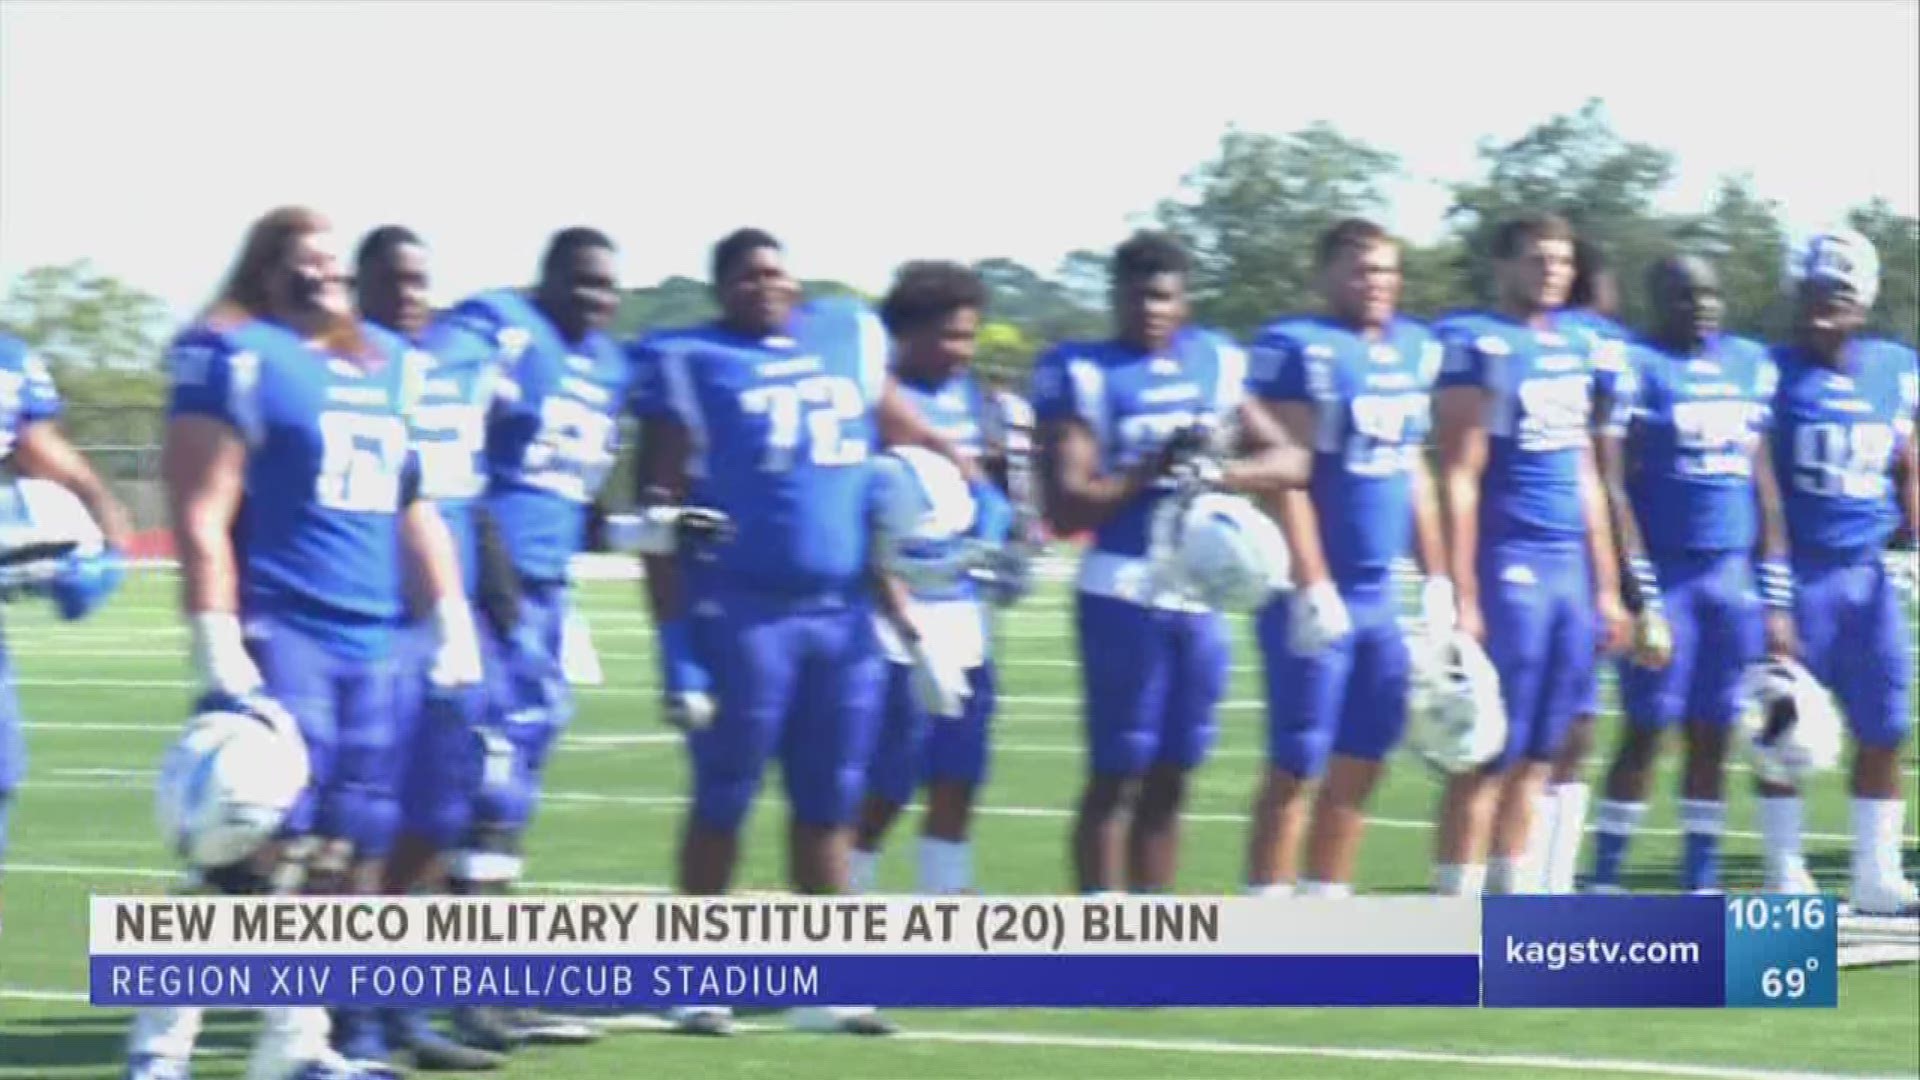 #20 Blinn knocked off New Mexico Military Institute 58-35 and clinched a playoff spot out of Region XIV in the process.